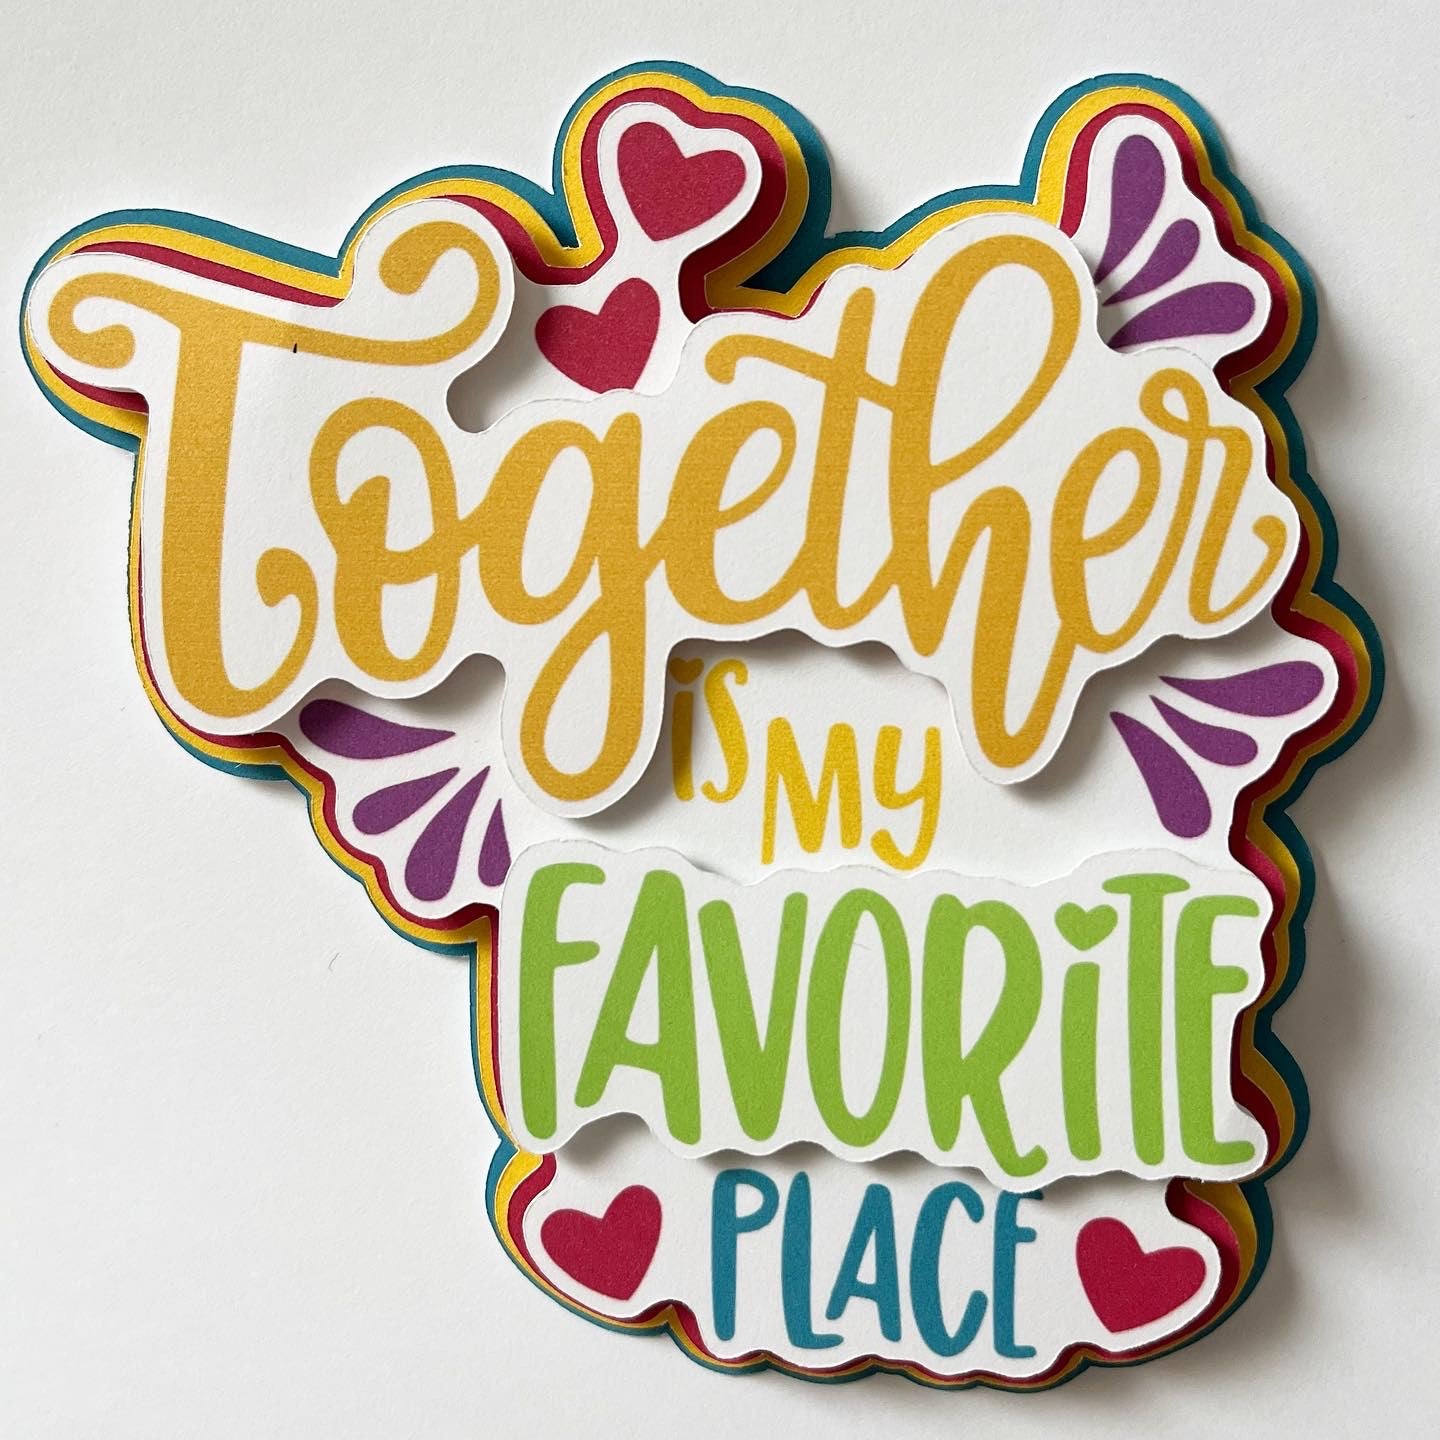 Together Is My Favorite Place Die Cut